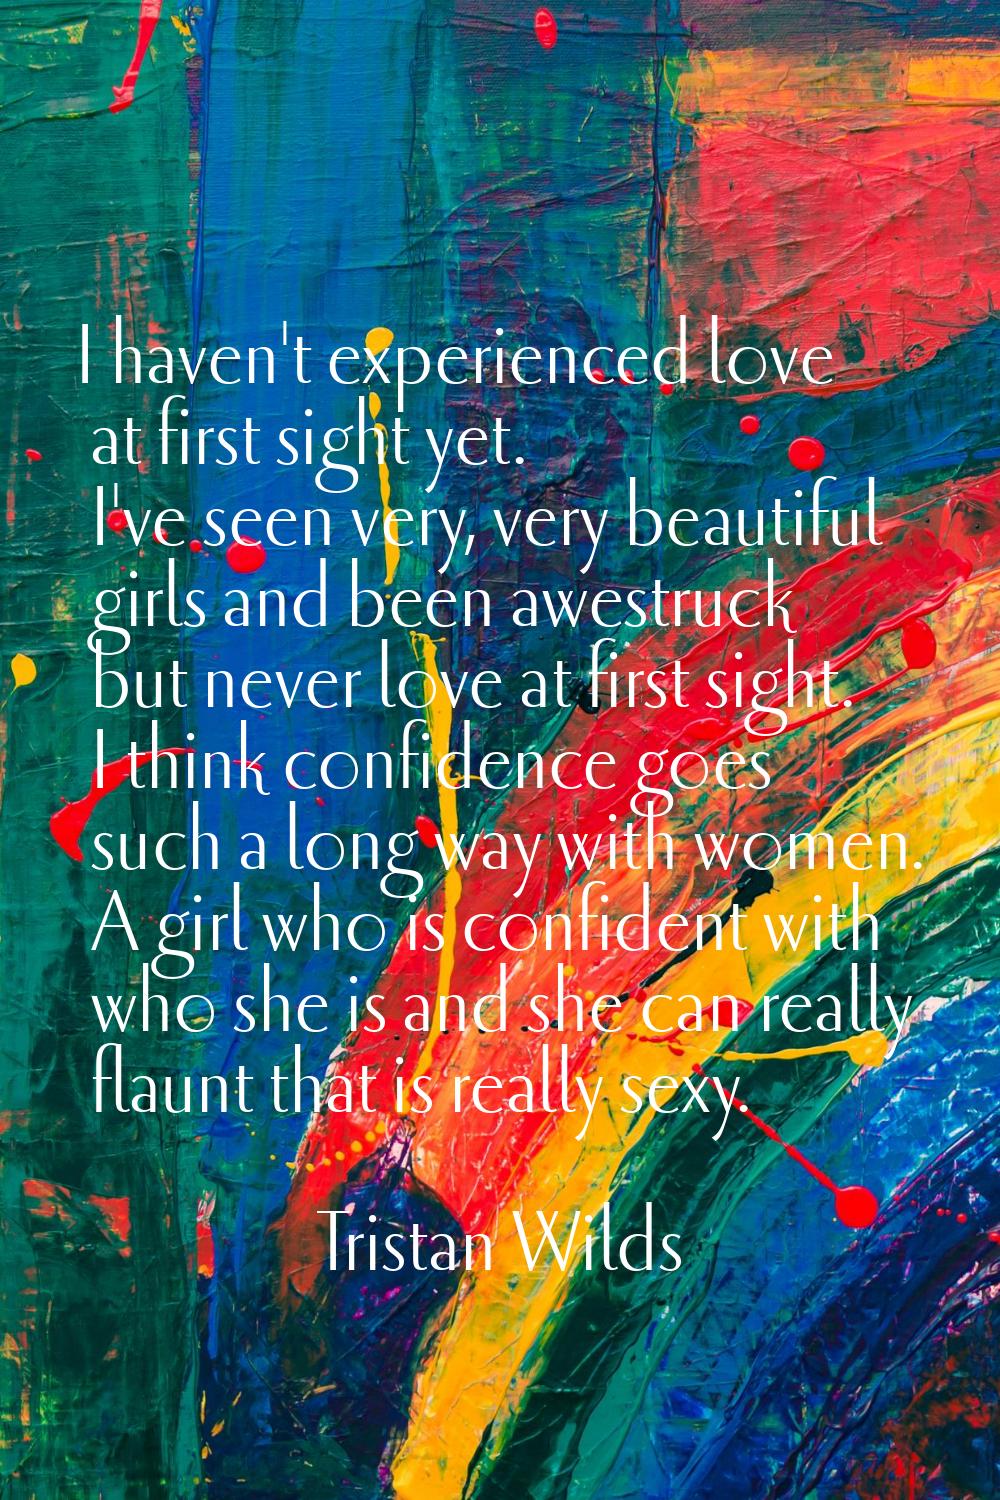 I haven't experienced love at first sight yet. I've seen very, very beautiful girls and been awestr